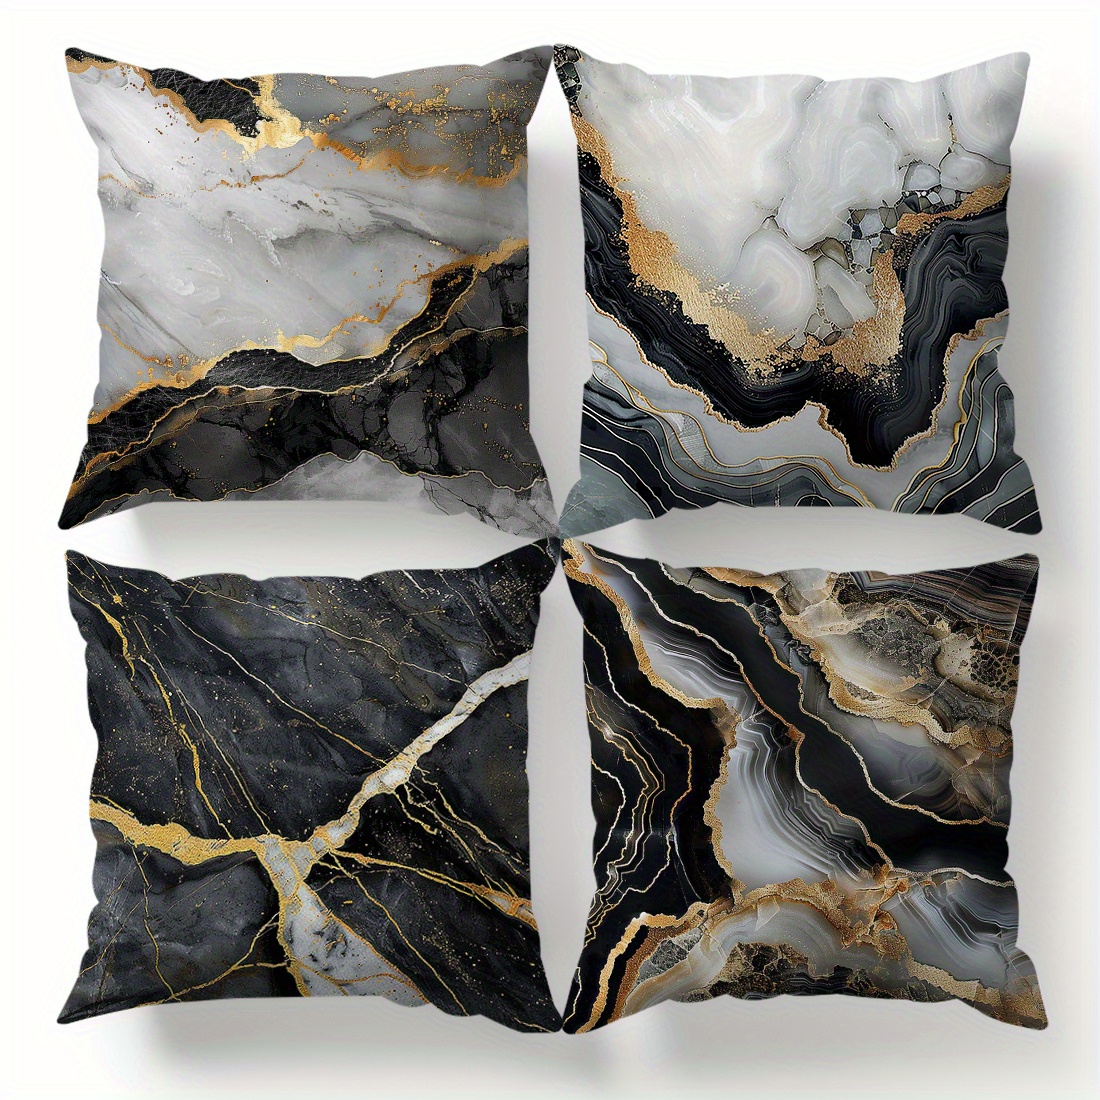 

4pcs Contemporary Black And Gold Marble Pattern Throw Pillow Covers, 45x45cm Peach Skin Velvet Zippered Sofa Cushion Cases, Machine Washable Decorative Pillowcases For Various Room Types